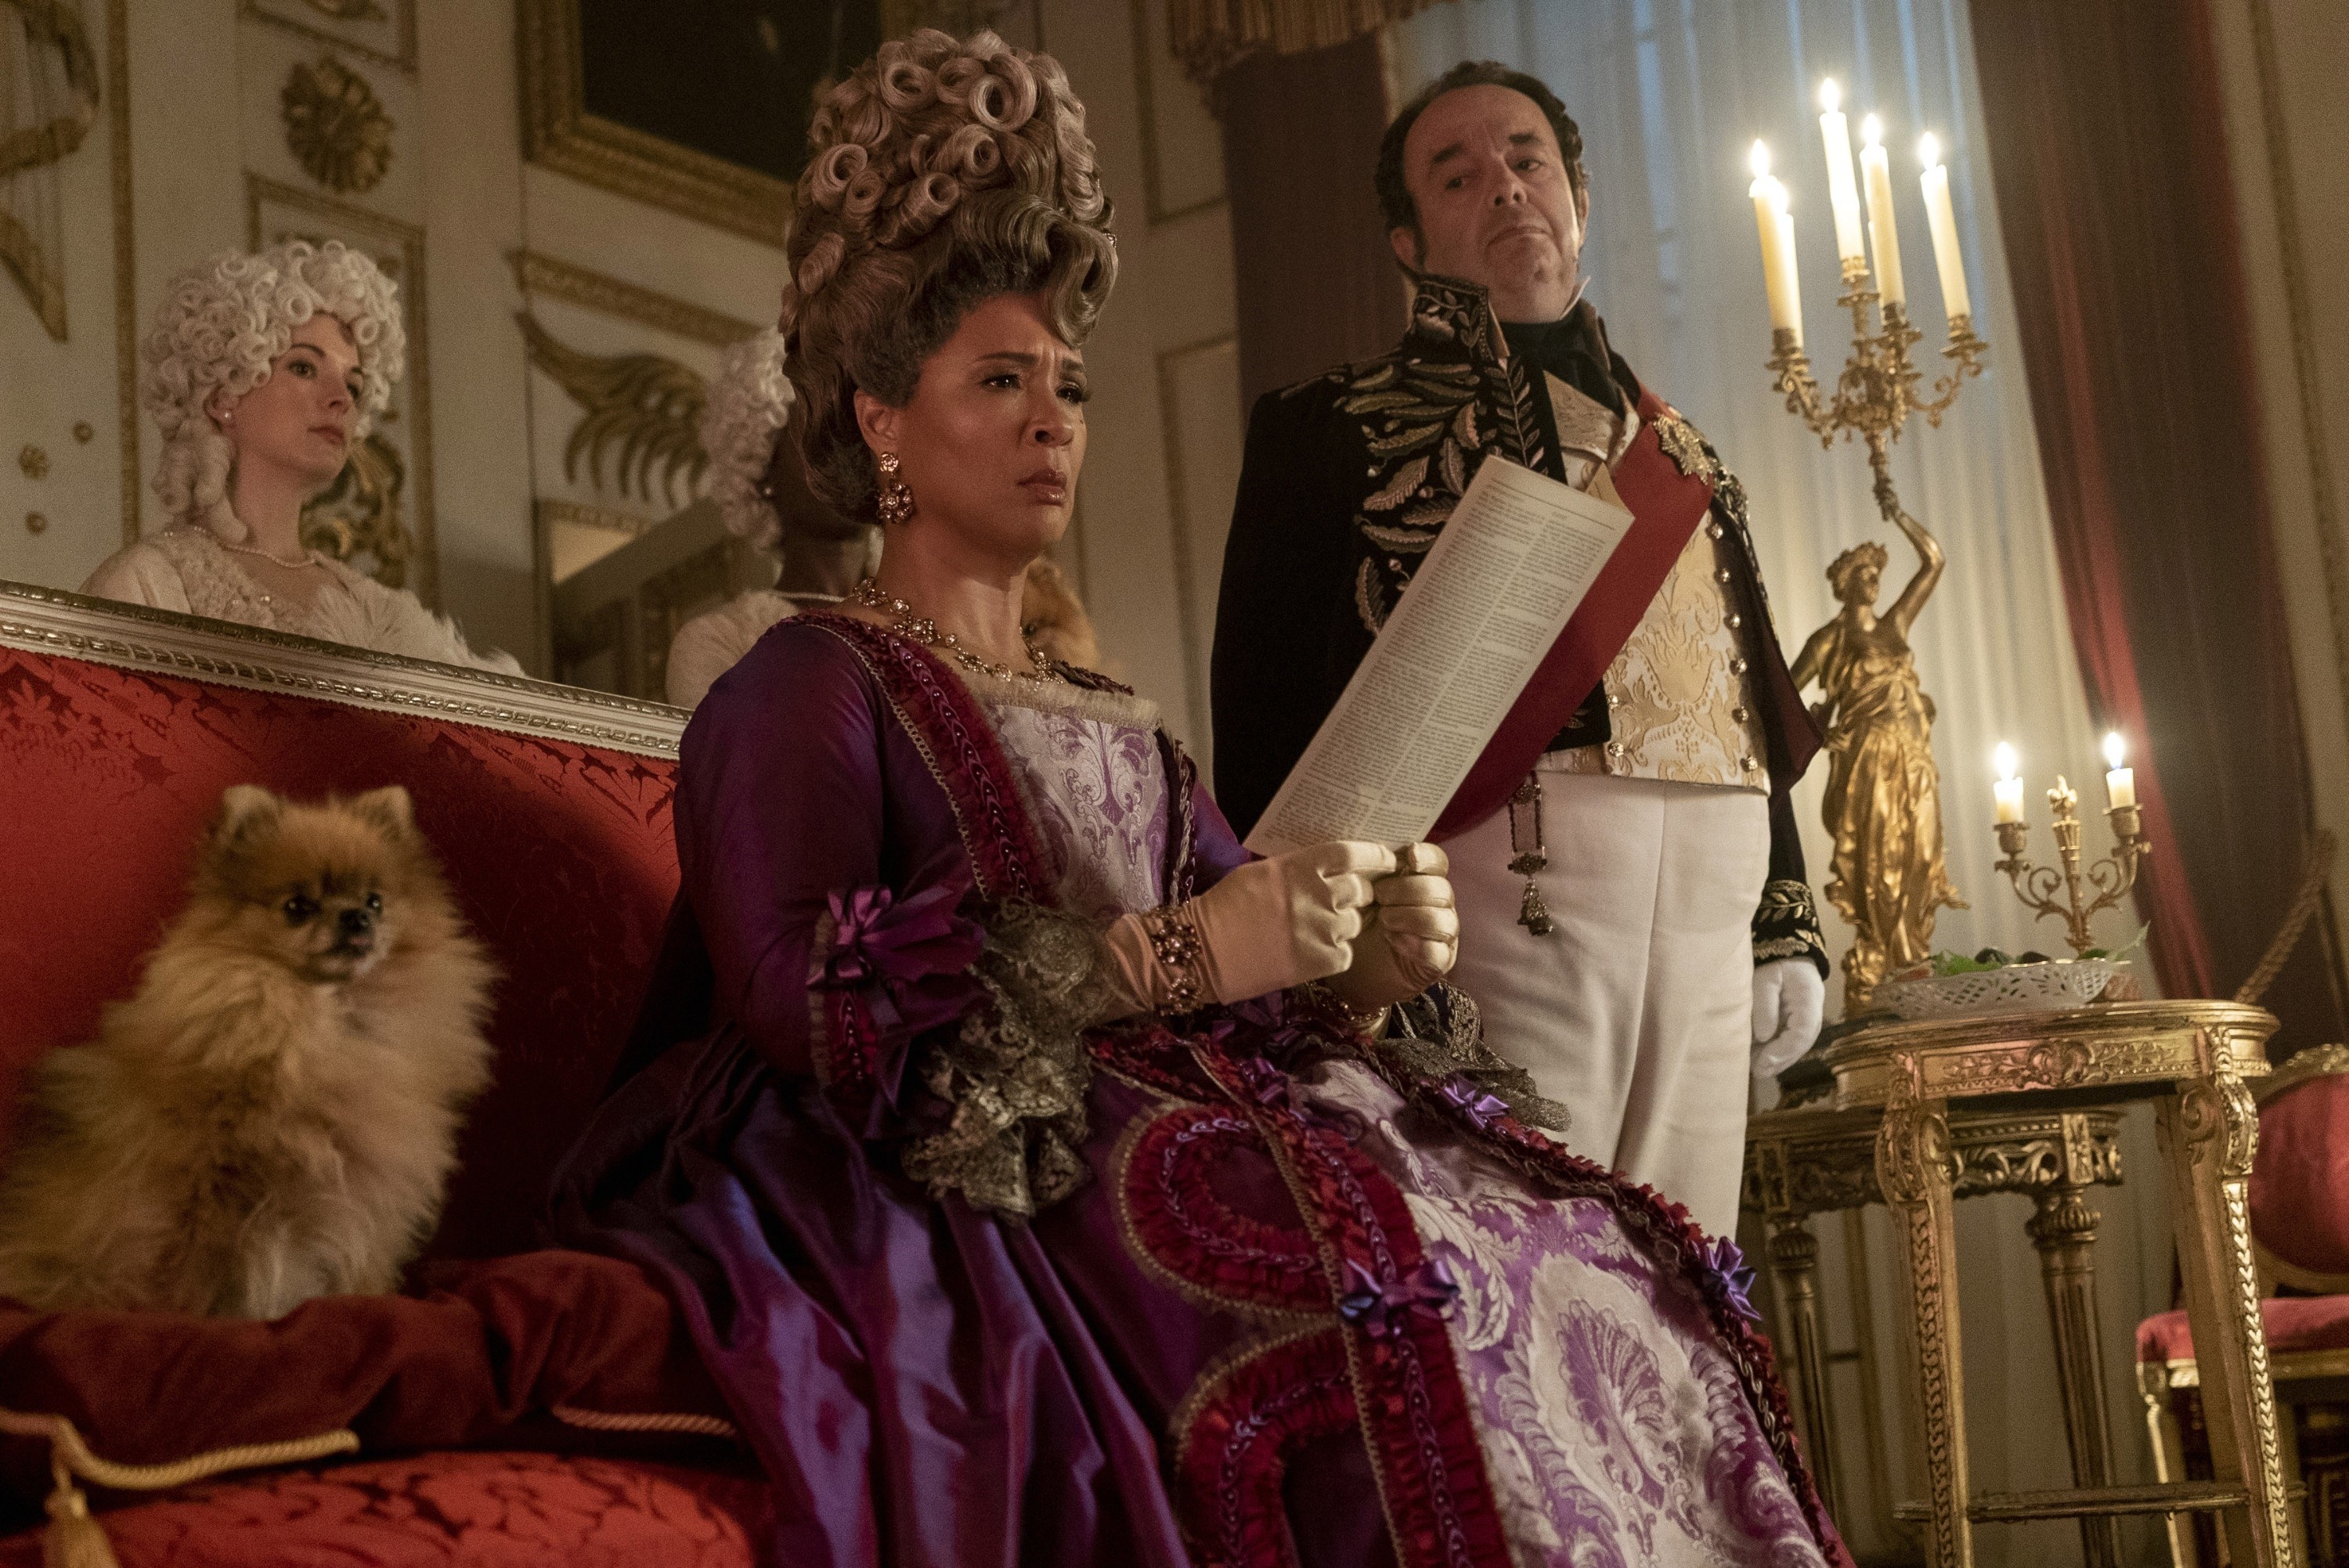 Golda Rosheuvel as Queen Charlotte looking at a paper while a man looks at her